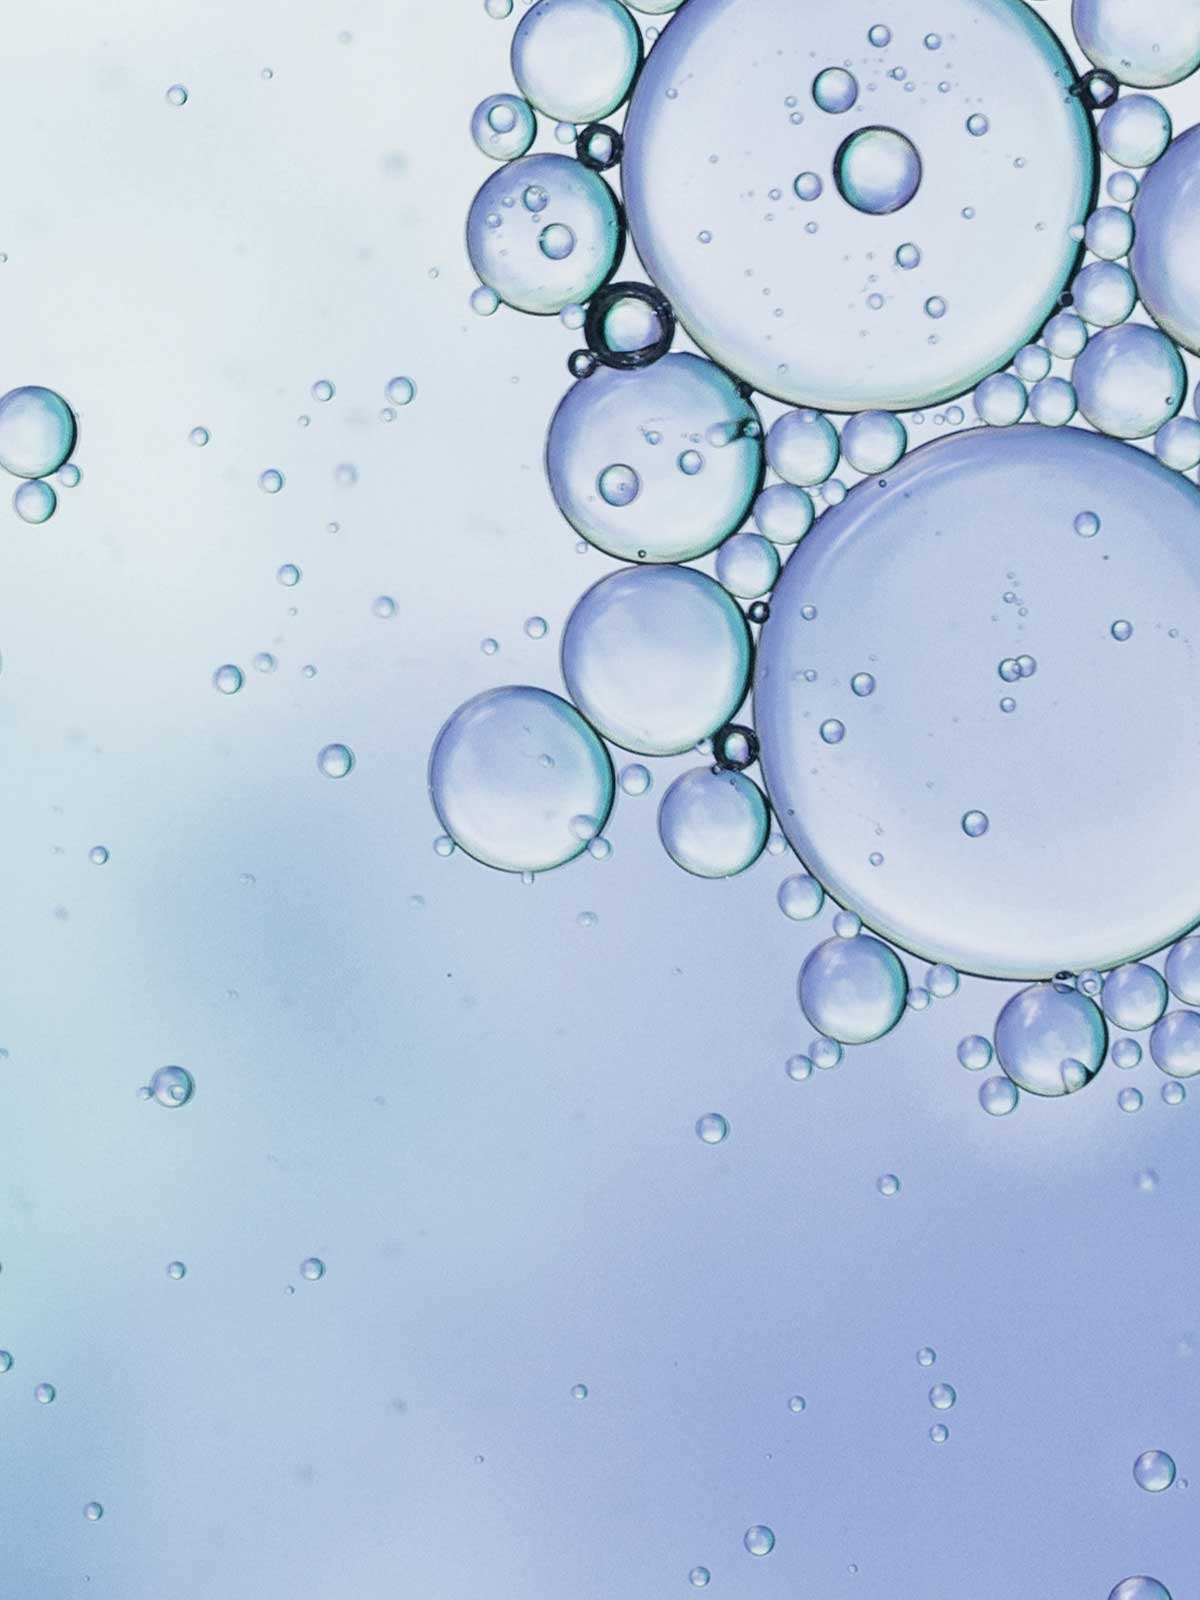 A close up of water bubbles on a blue background.